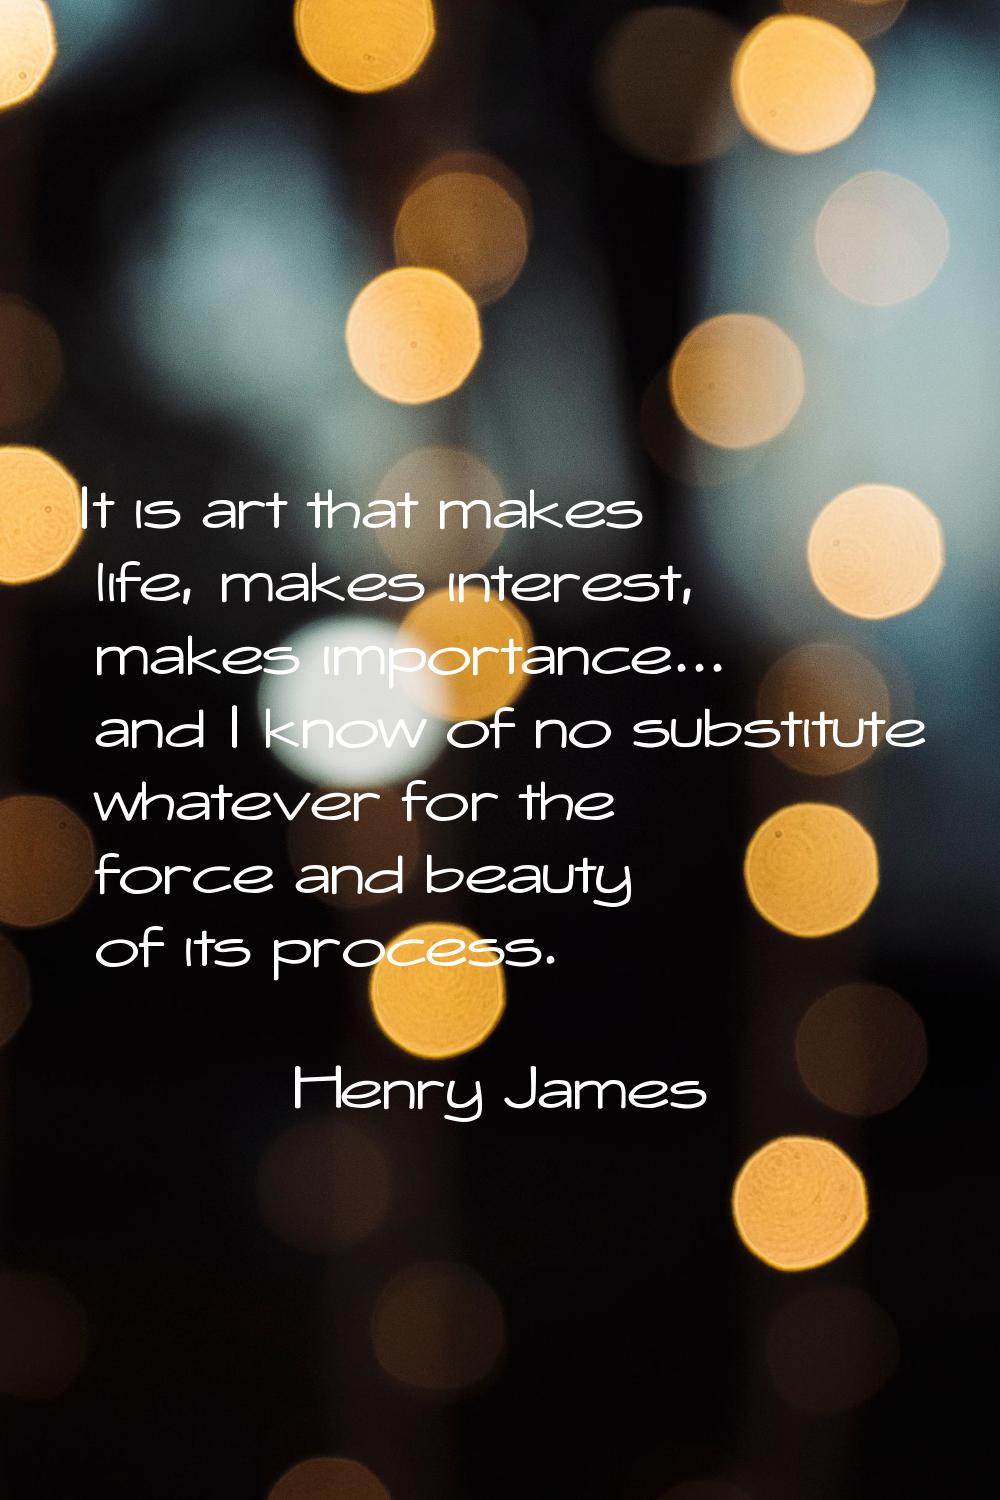 It is art that makes life, makes interest, makes importance... and I know of no substitute whatever